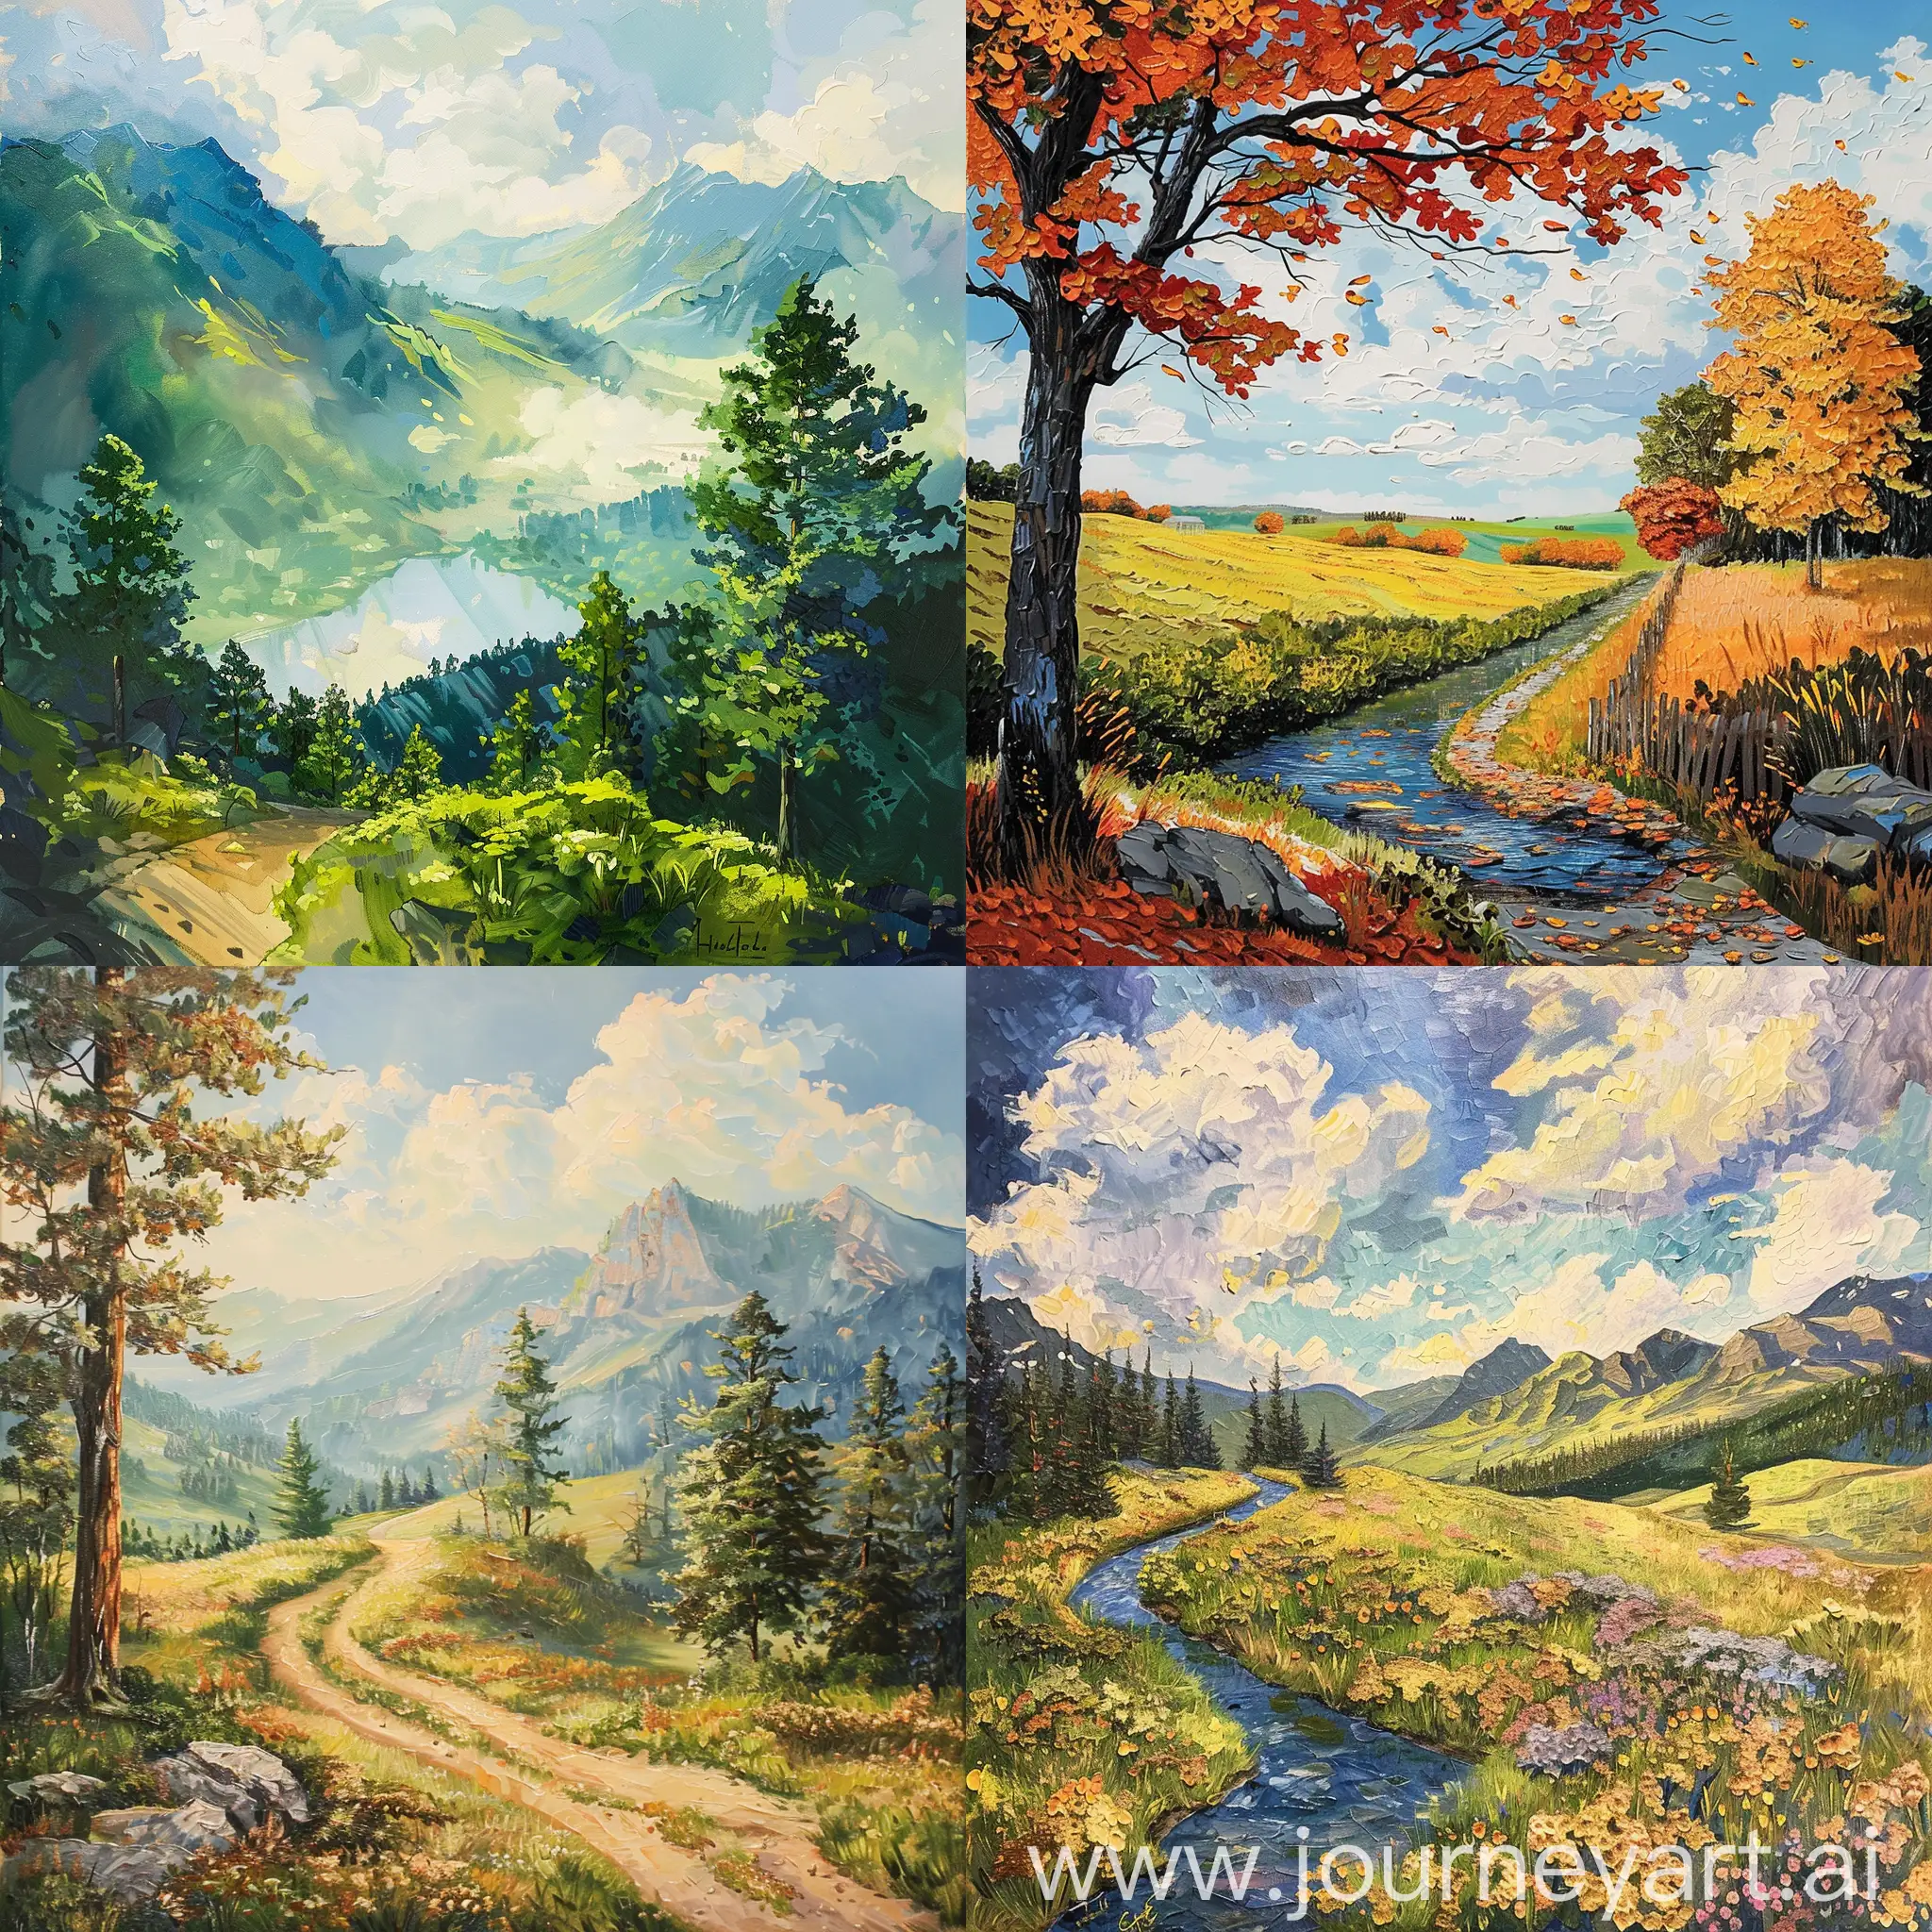 Create a landscape painting depicting the feeling of joy